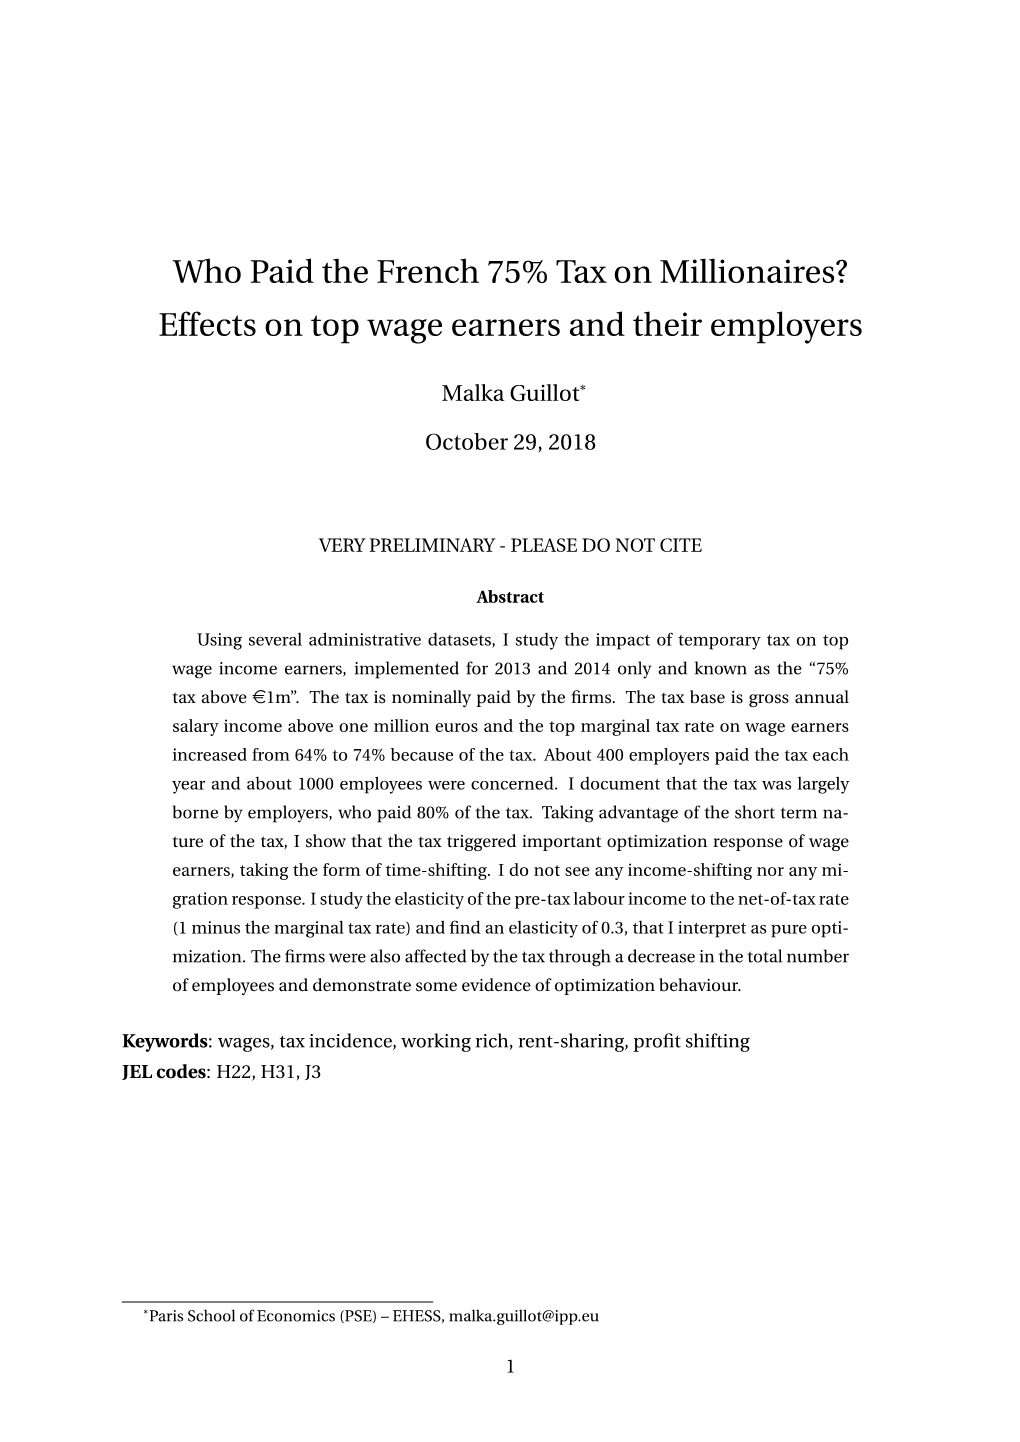 Who Paid the French 75% Tax on Millionaires? Effects on Top Wage Earners and Their Employers